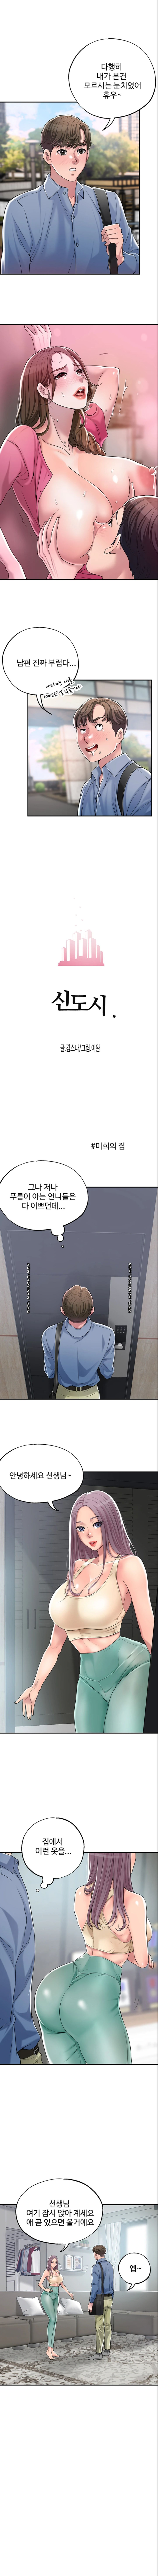 New Town Raw - Chapter 2 Page 3